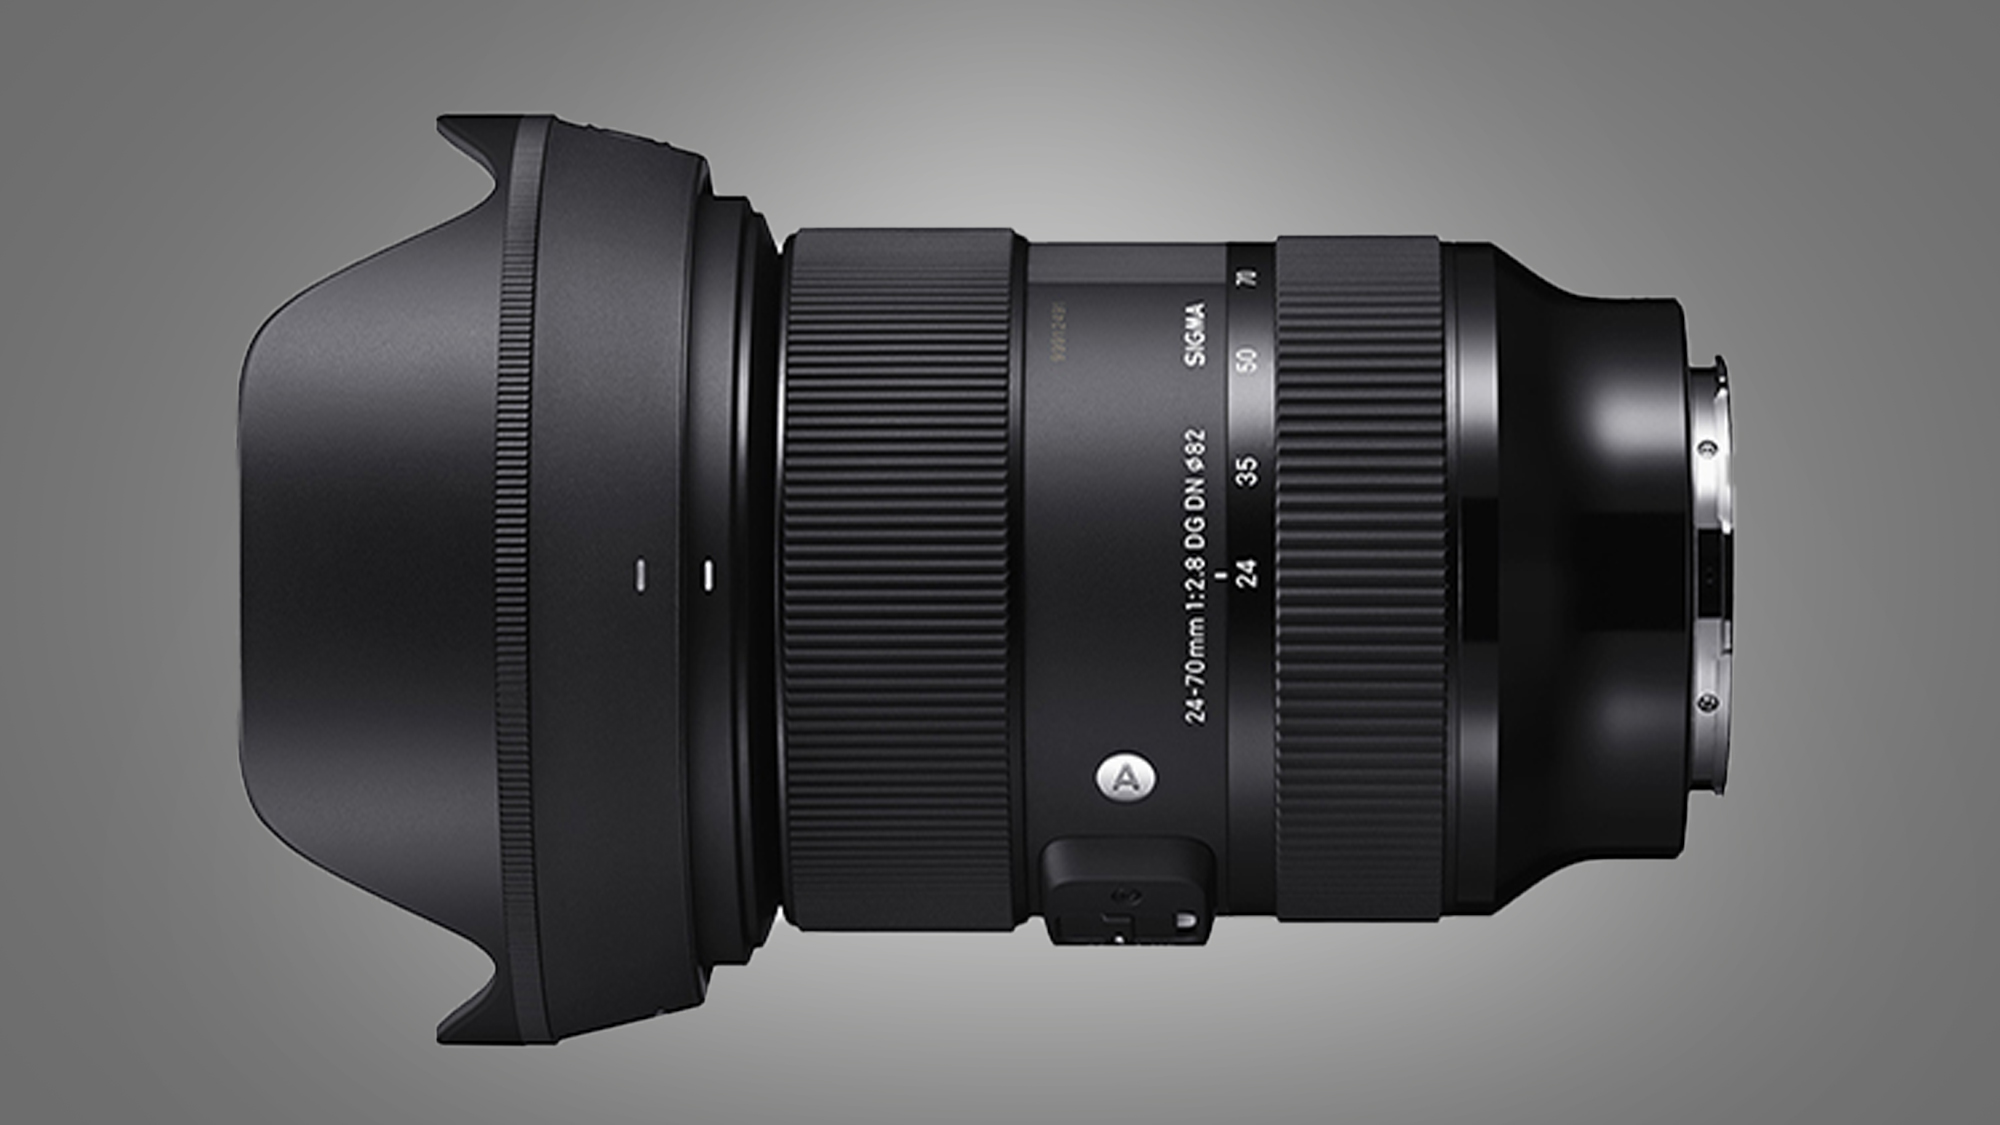 The Sigma 24-70mm F2.8 DG DN Art lens on a grey background